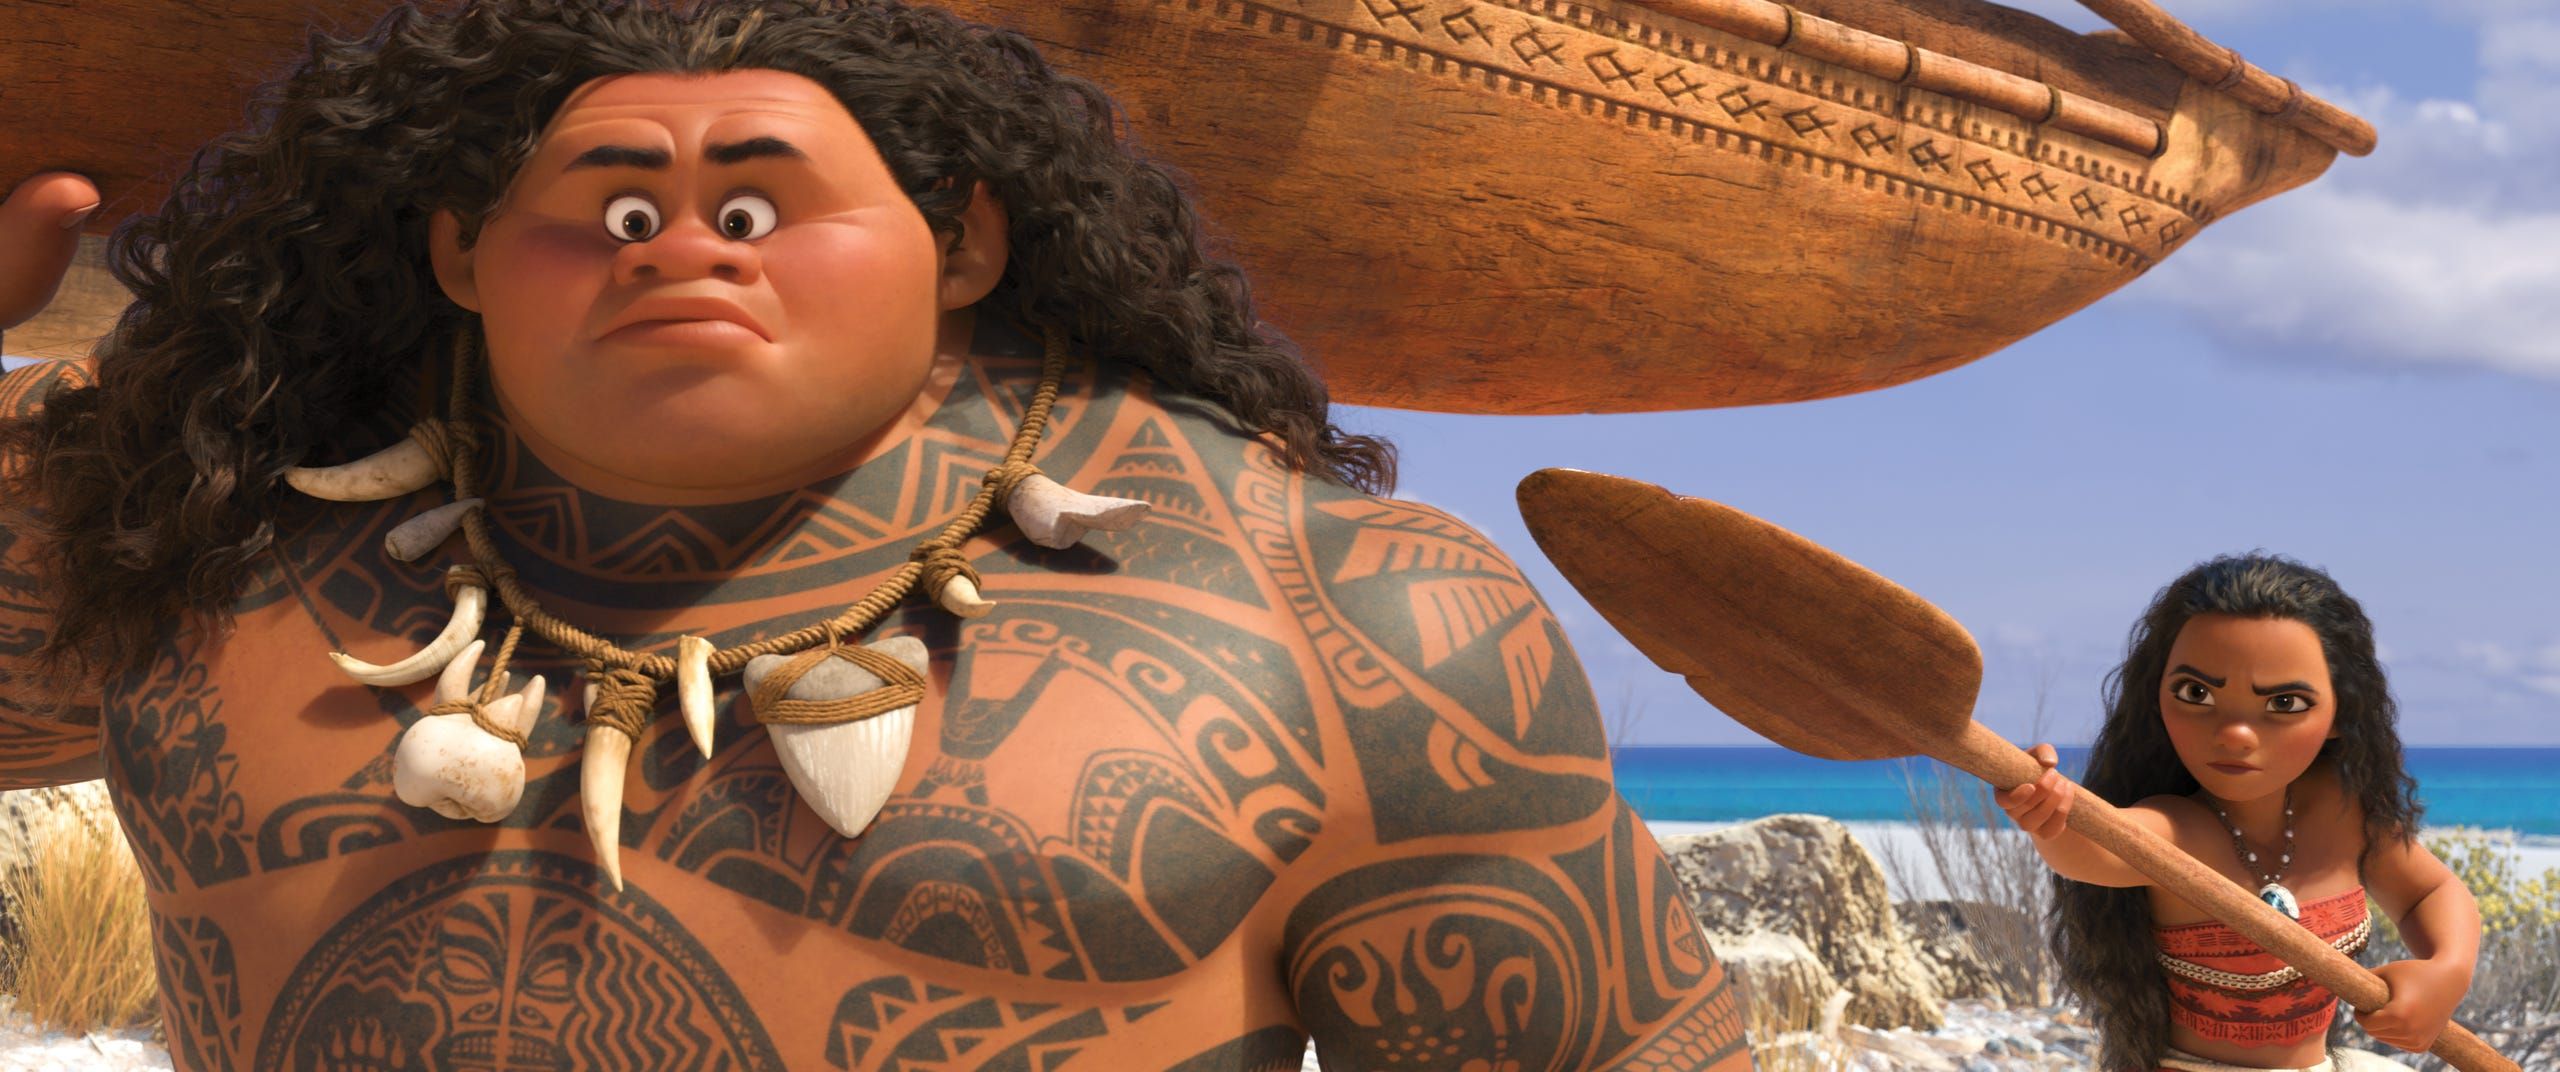 Exclusive image: Unseen 'Moana' characters, plus a bald Maui